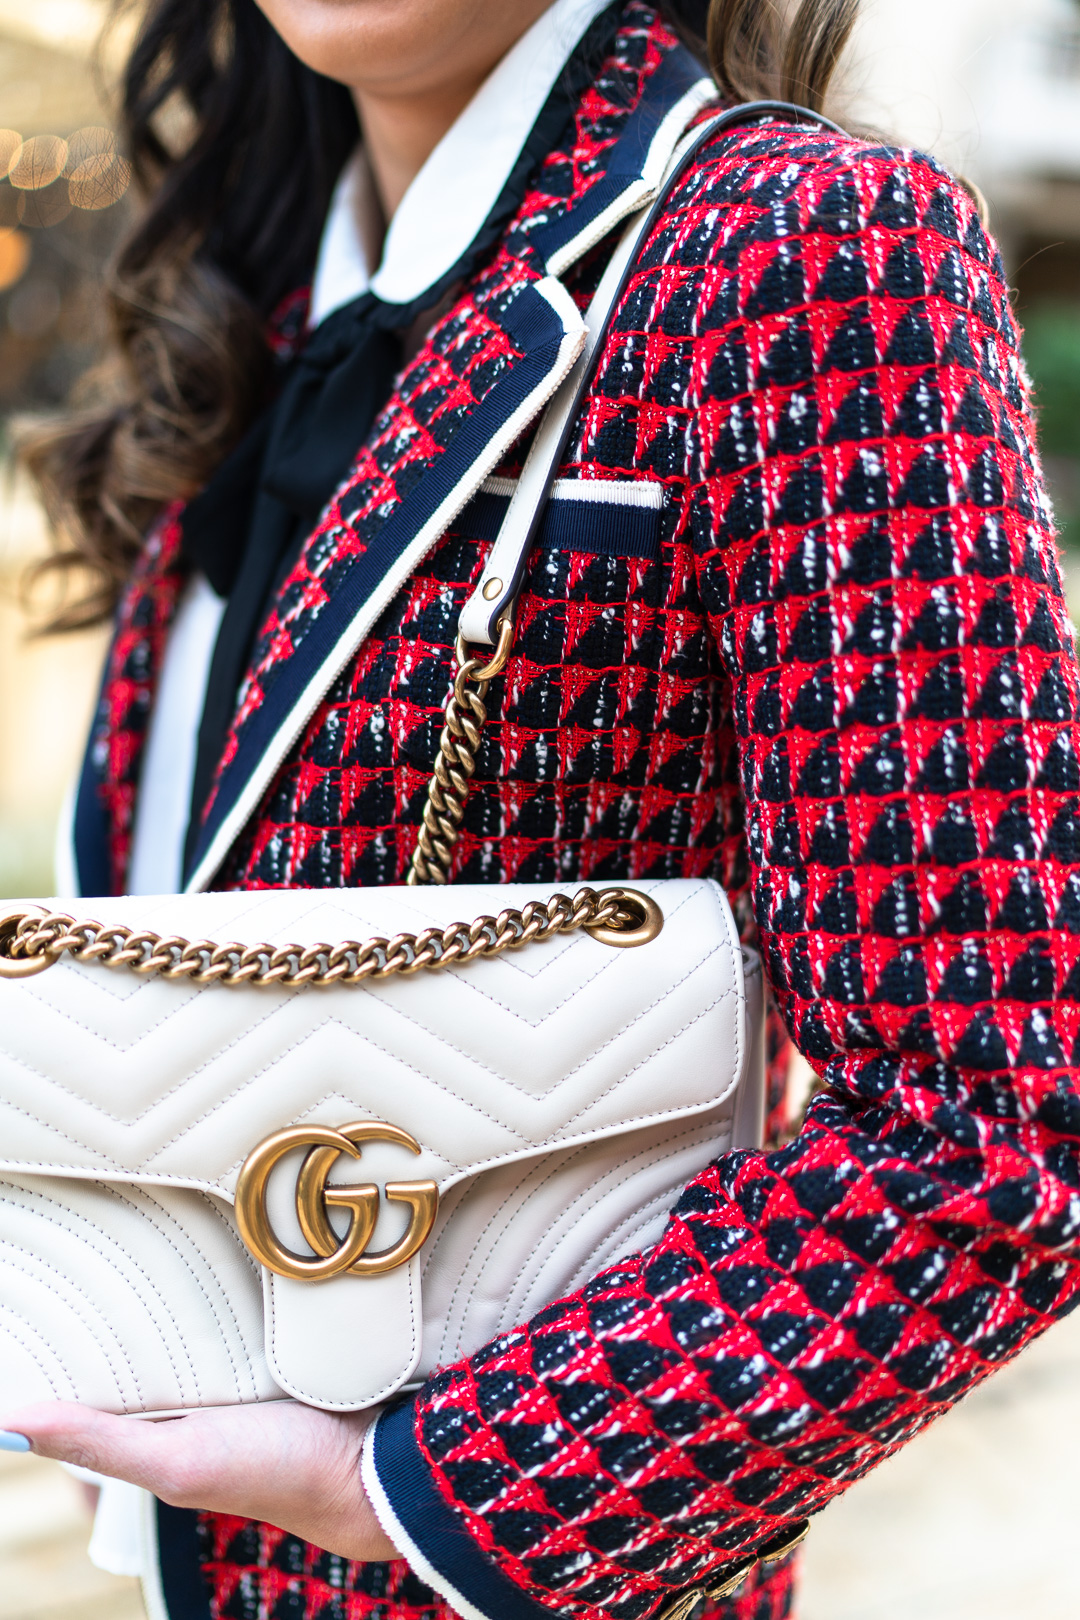 The Ultimate Guide to the Gucci Outlet - The Luxury Lowdown